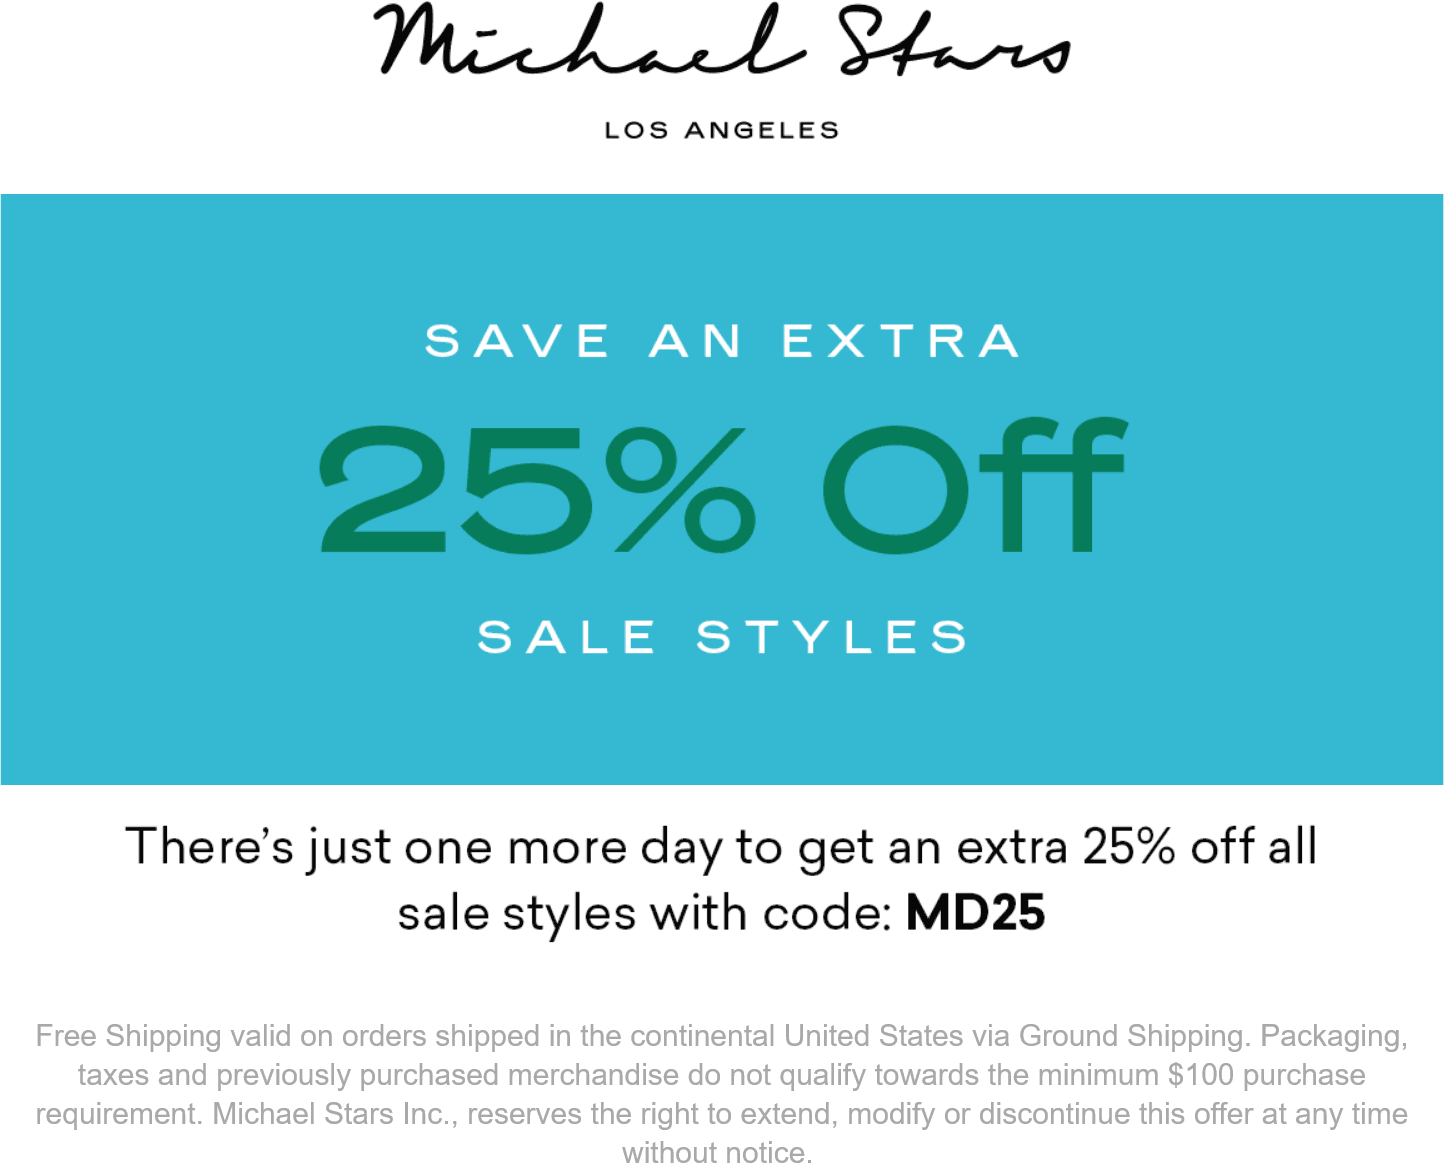 Michael Stars stores Coupon  Extra 25% off sale styles today at Michael Stars via promo code MD25 #michaelstars 